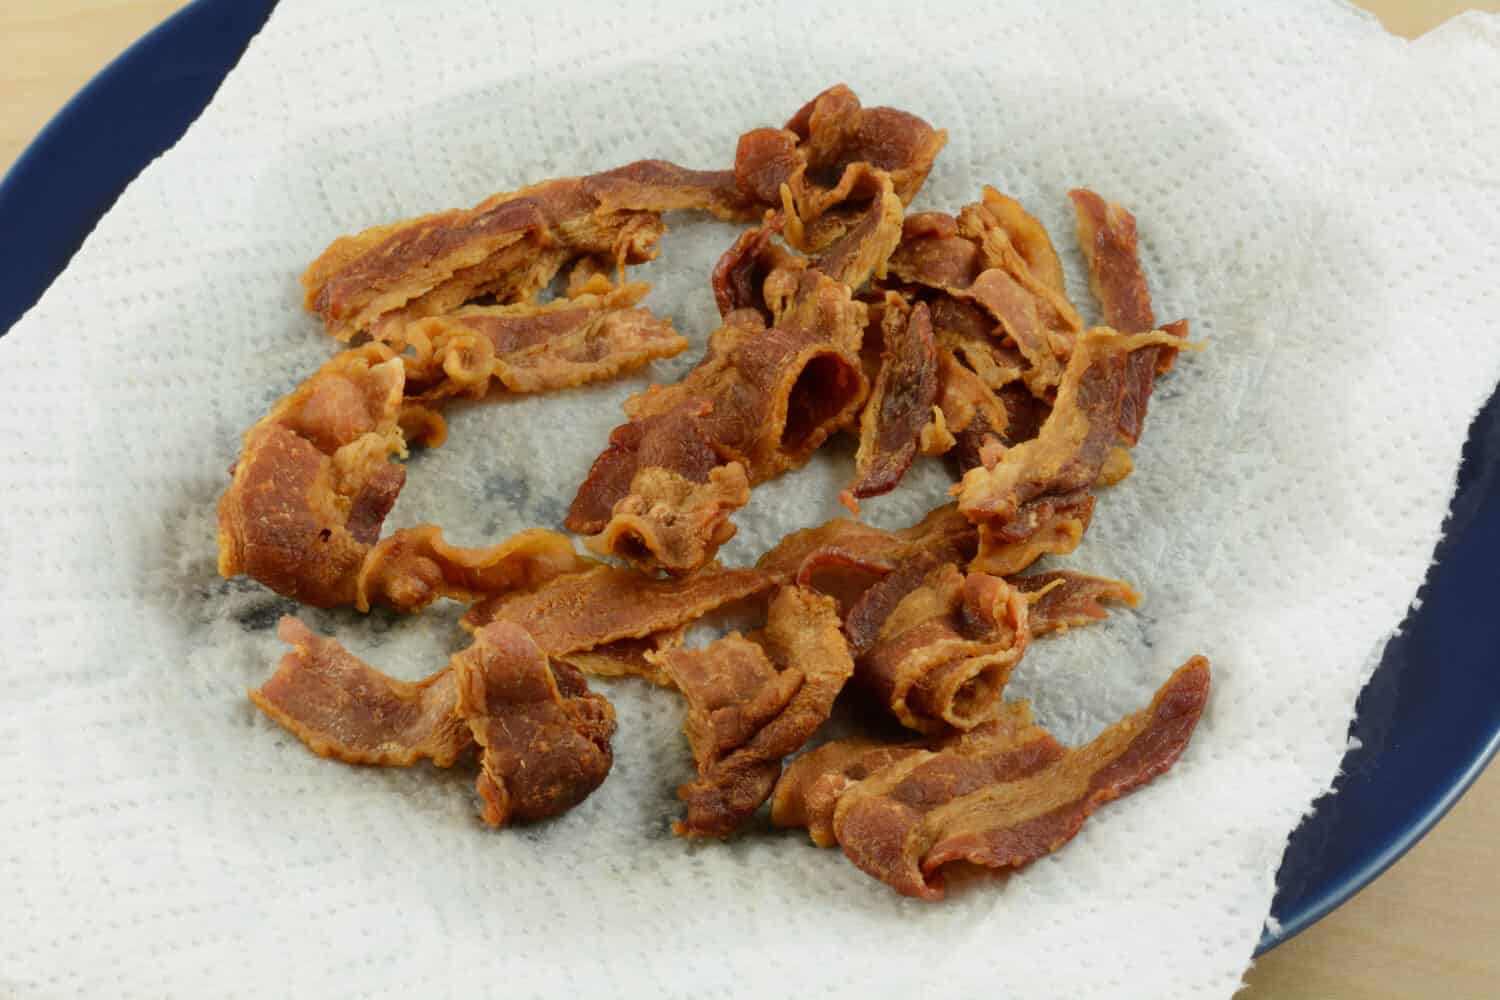 Microwaved crunchy bacon cooked on paper towel to absorb and reduce grease and fat and clean up afterwards